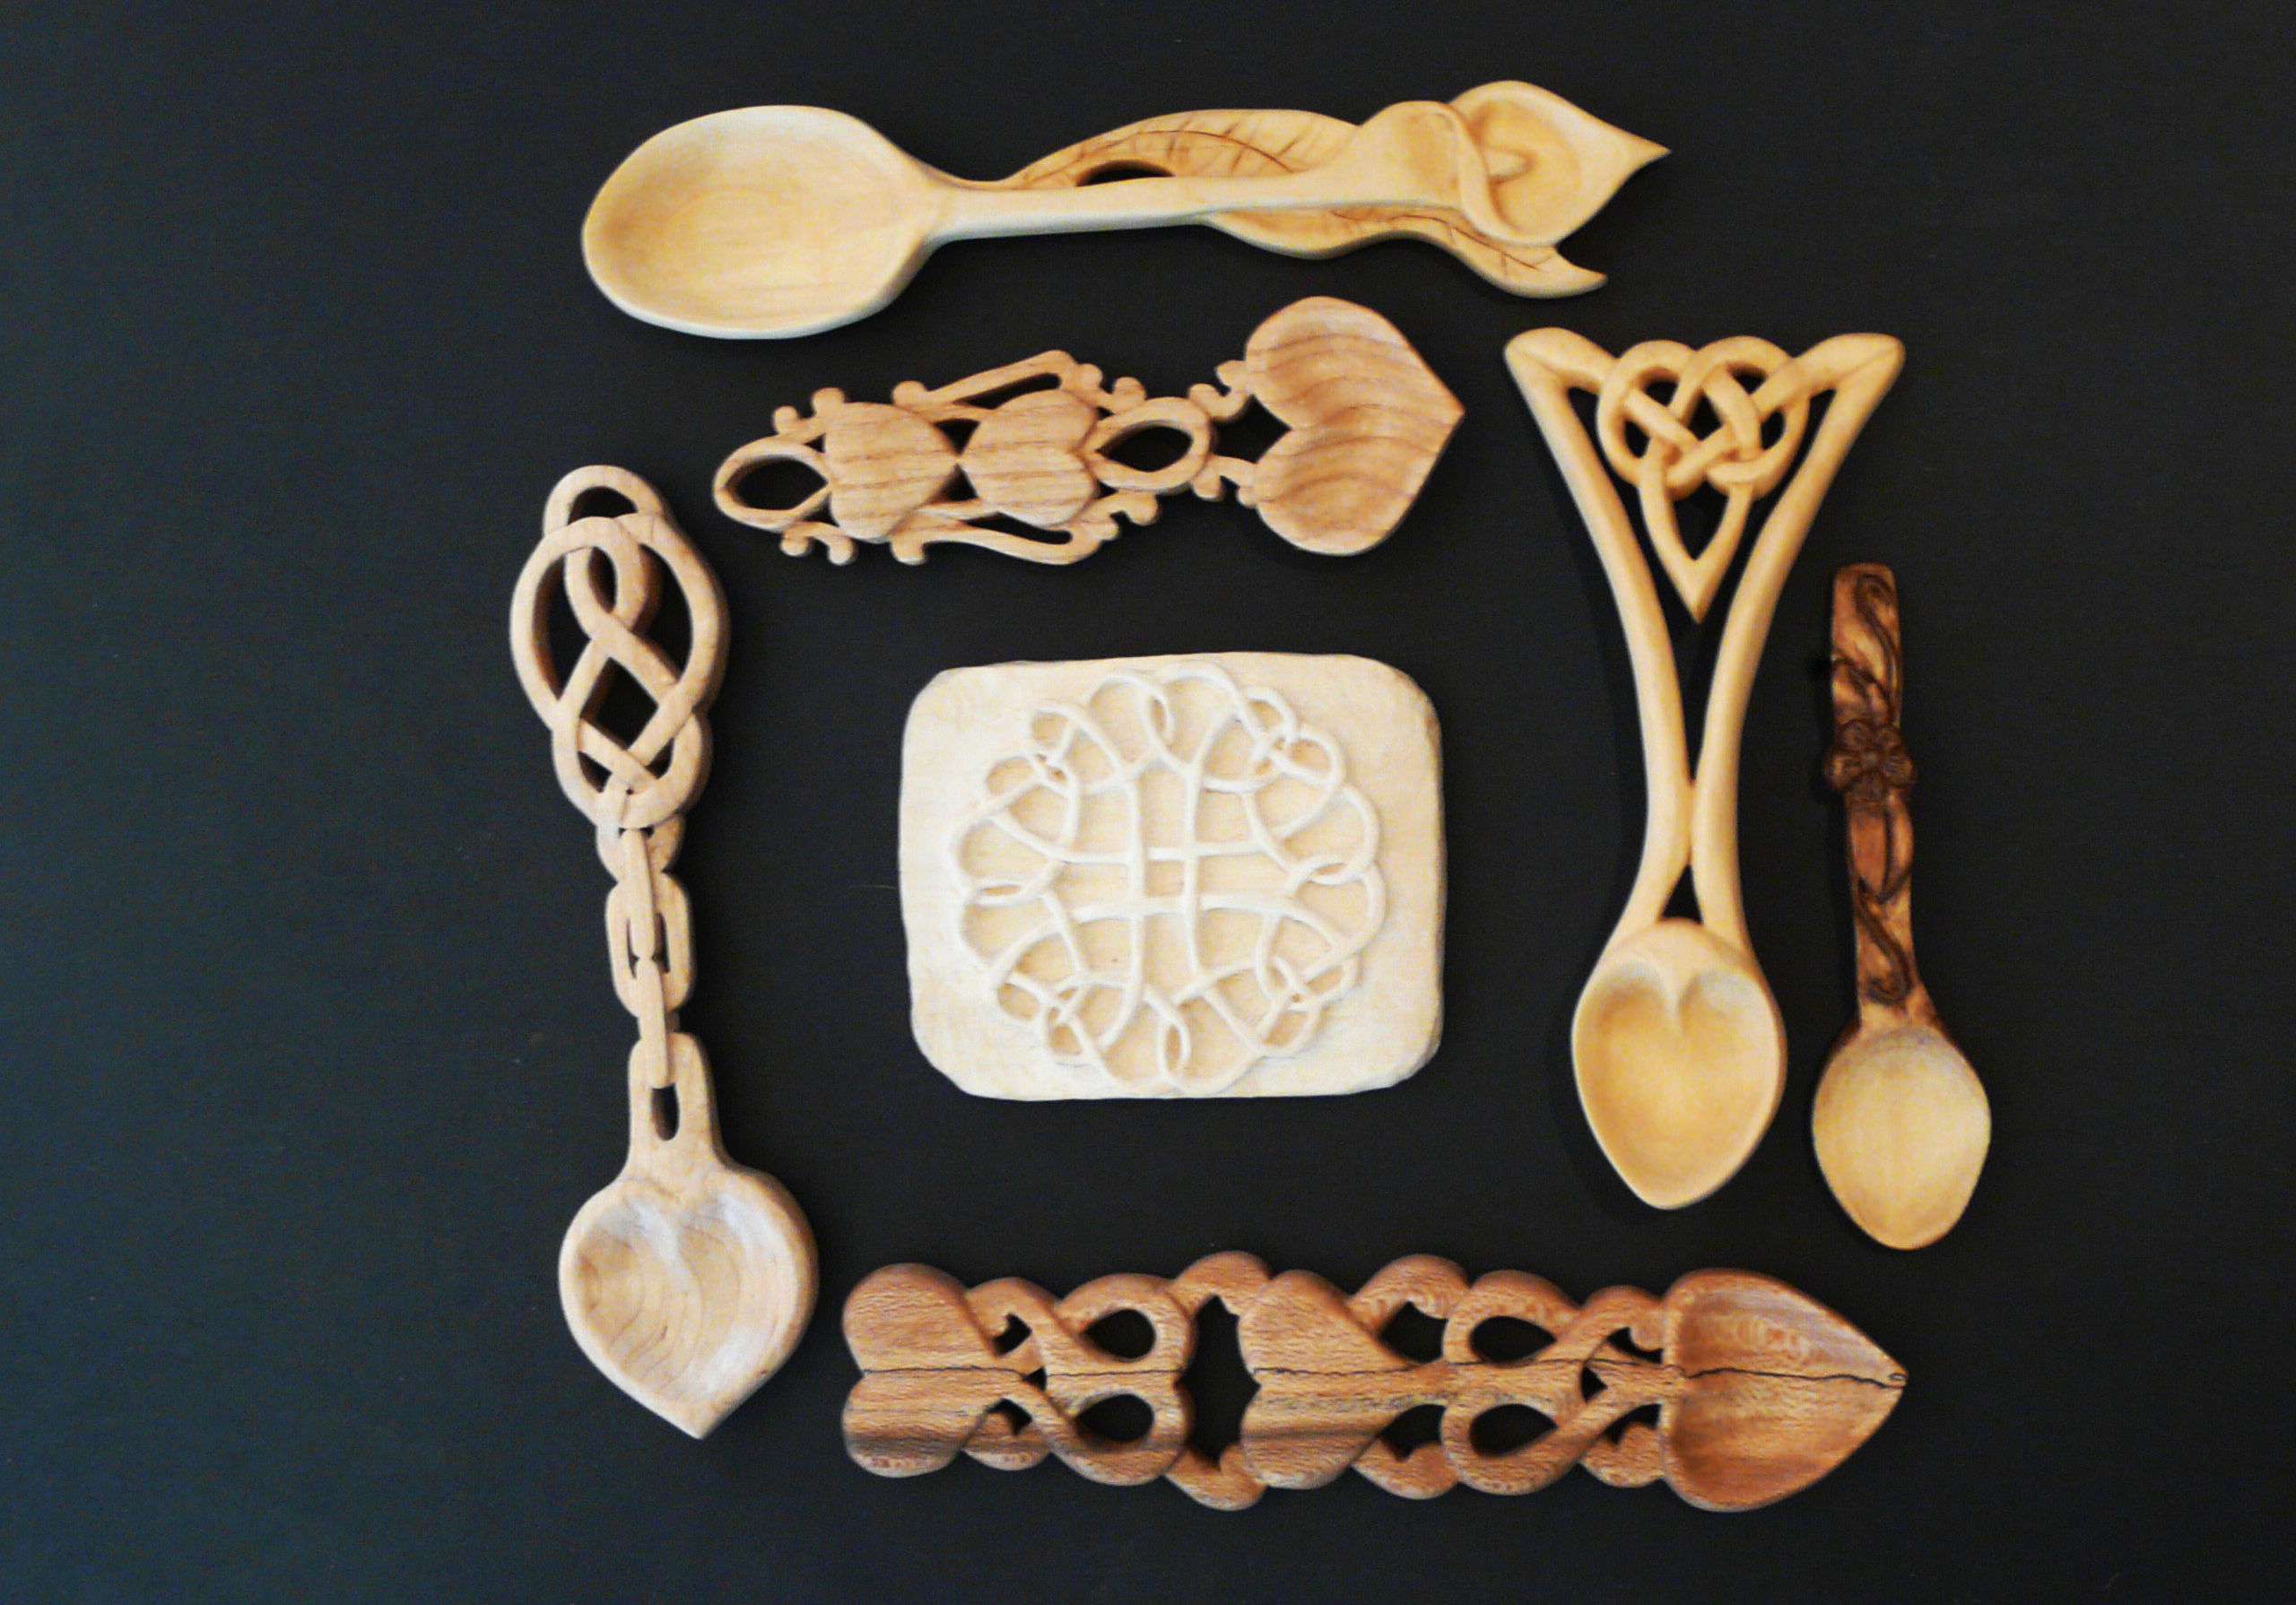 Love spoons and unfinished relief carving